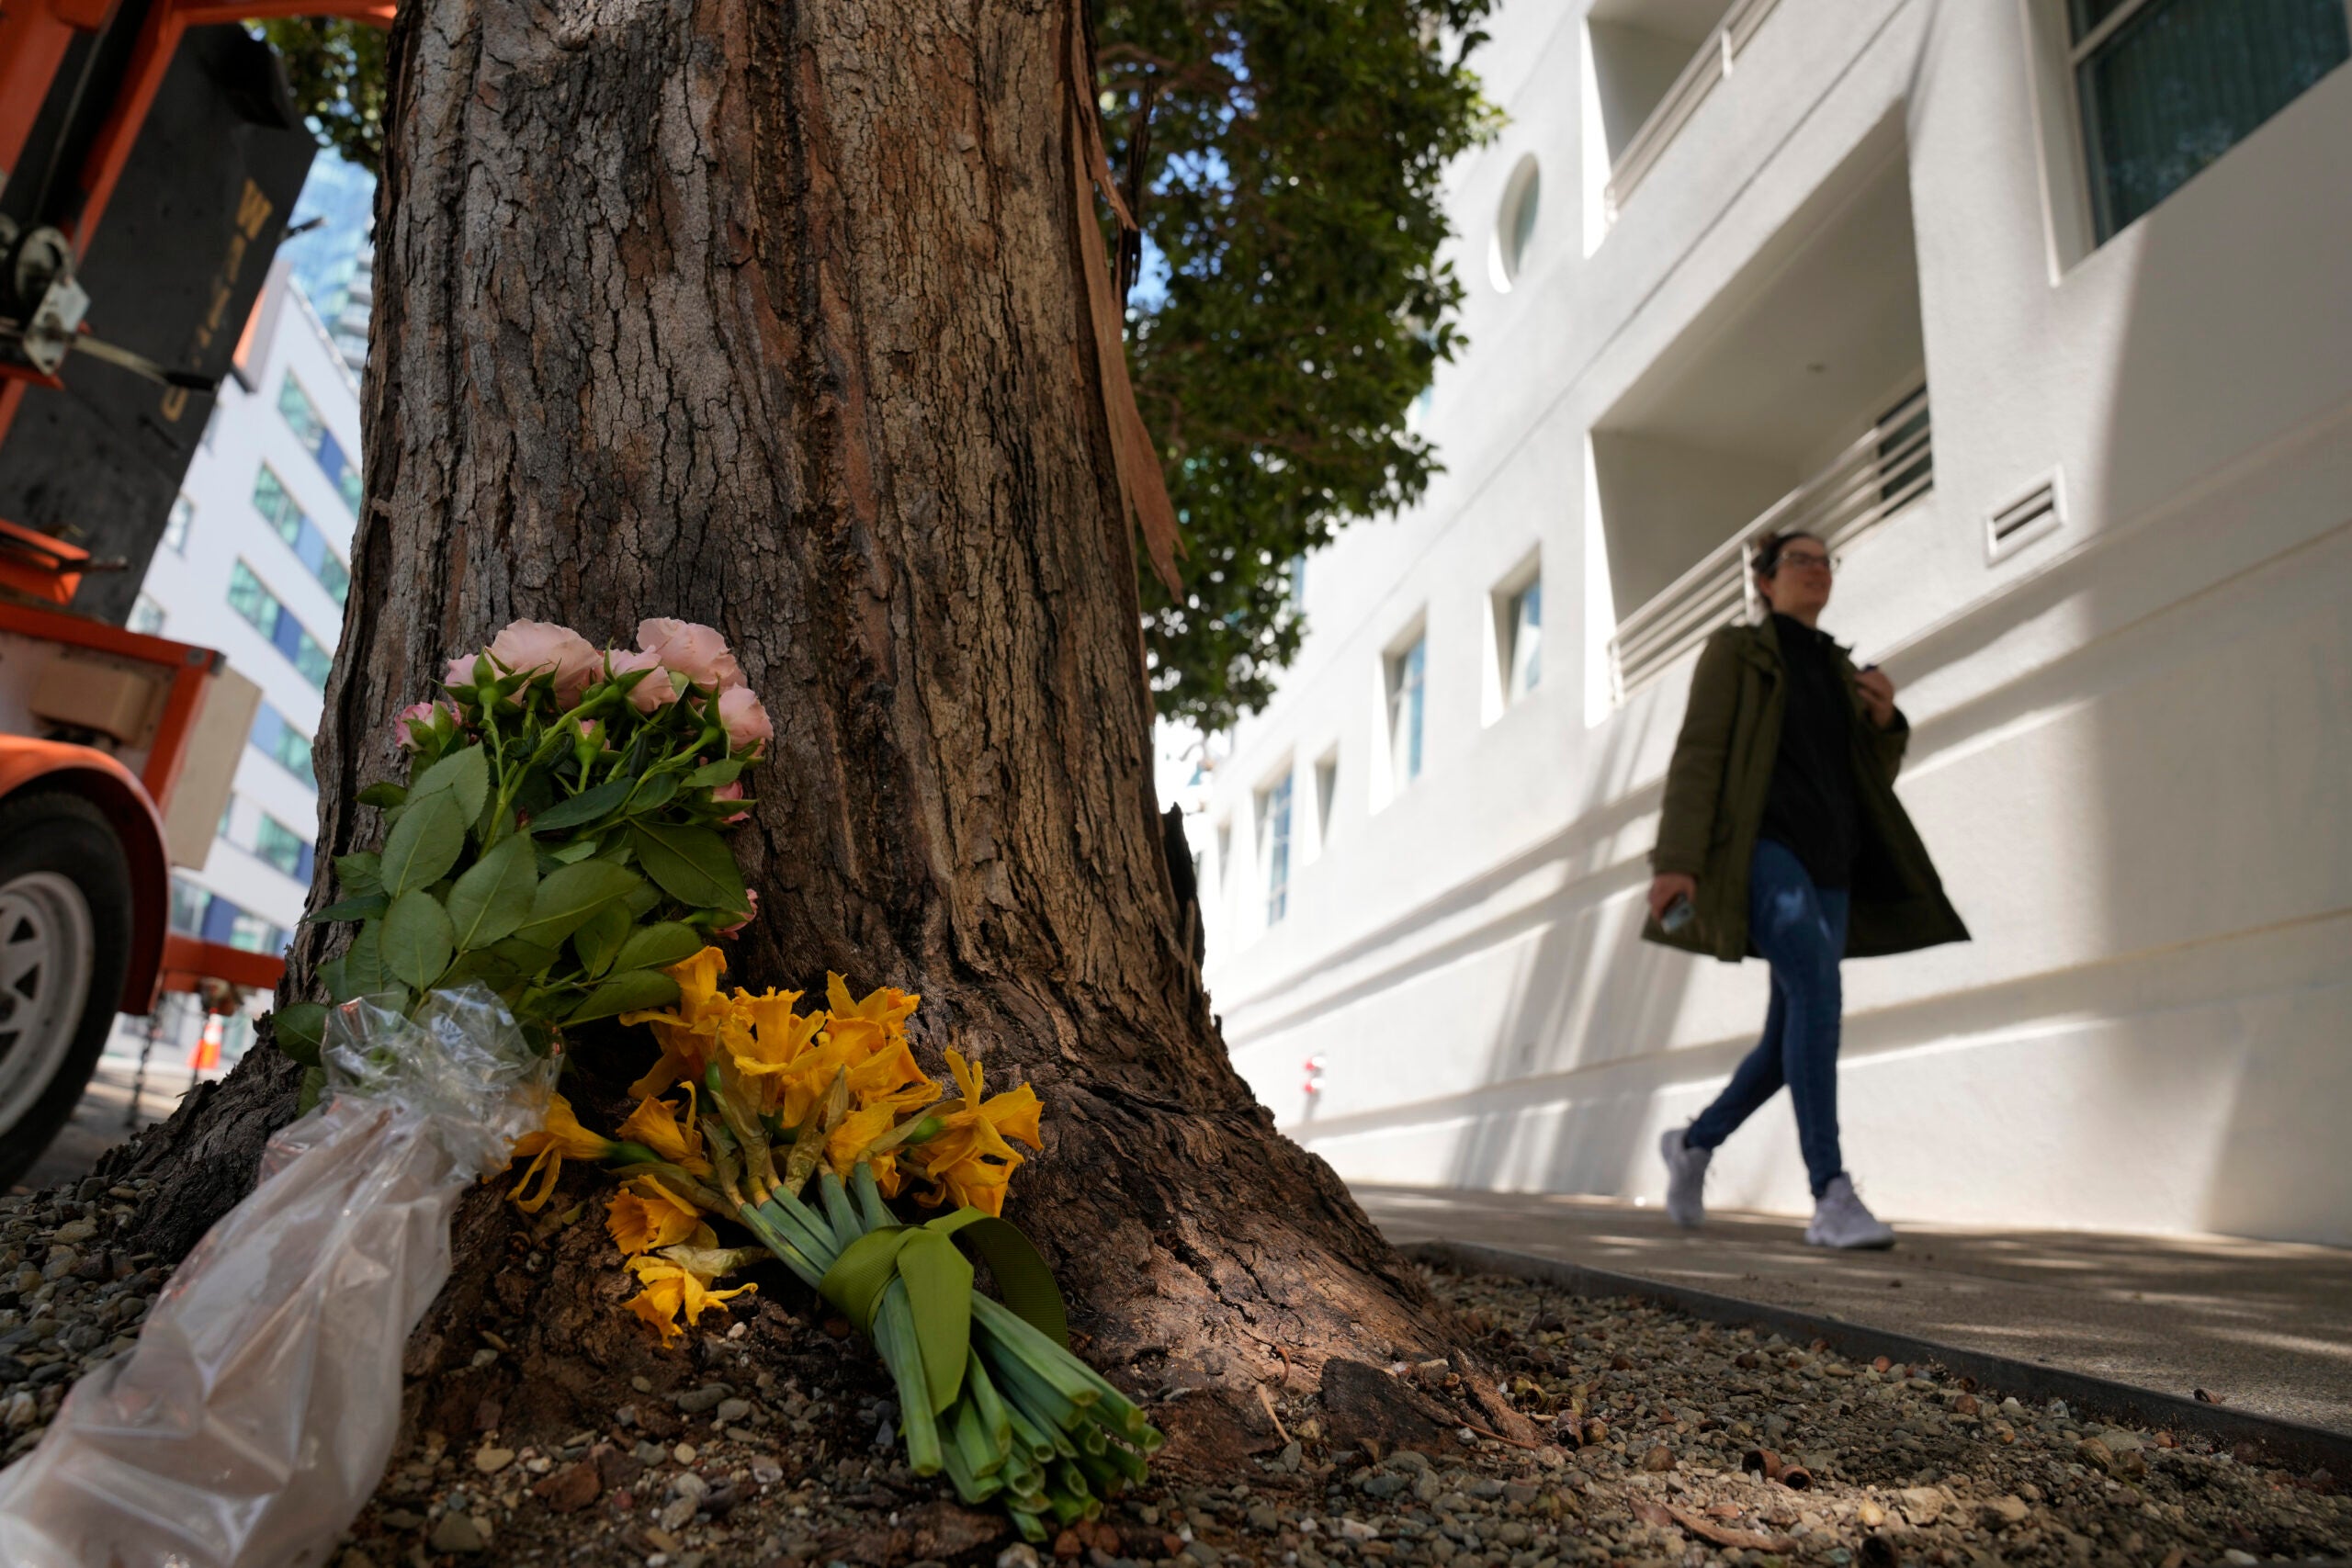 Cash App founder killed -- A woman walks past flowers left outside an apartment building where a technology executive was fatally stabbed in San Francisco.